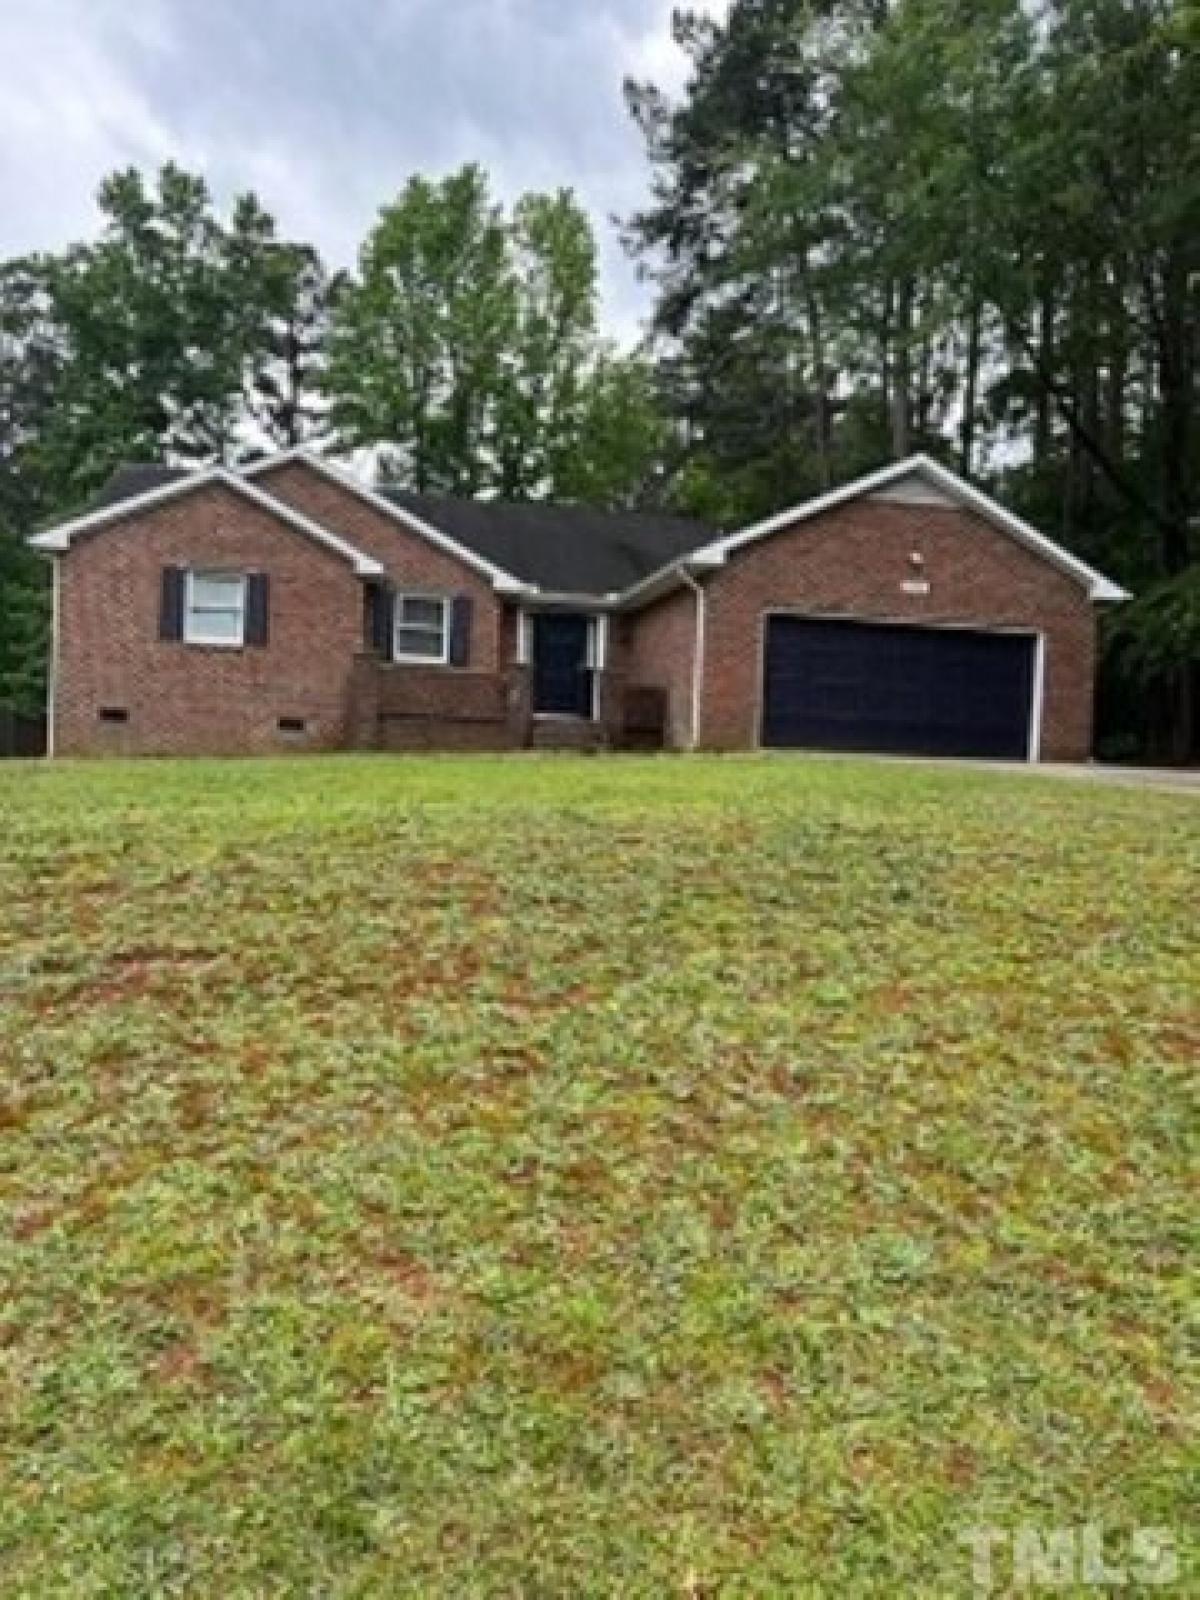 Picture of Home For Sale in Bunn, North Carolina, United States